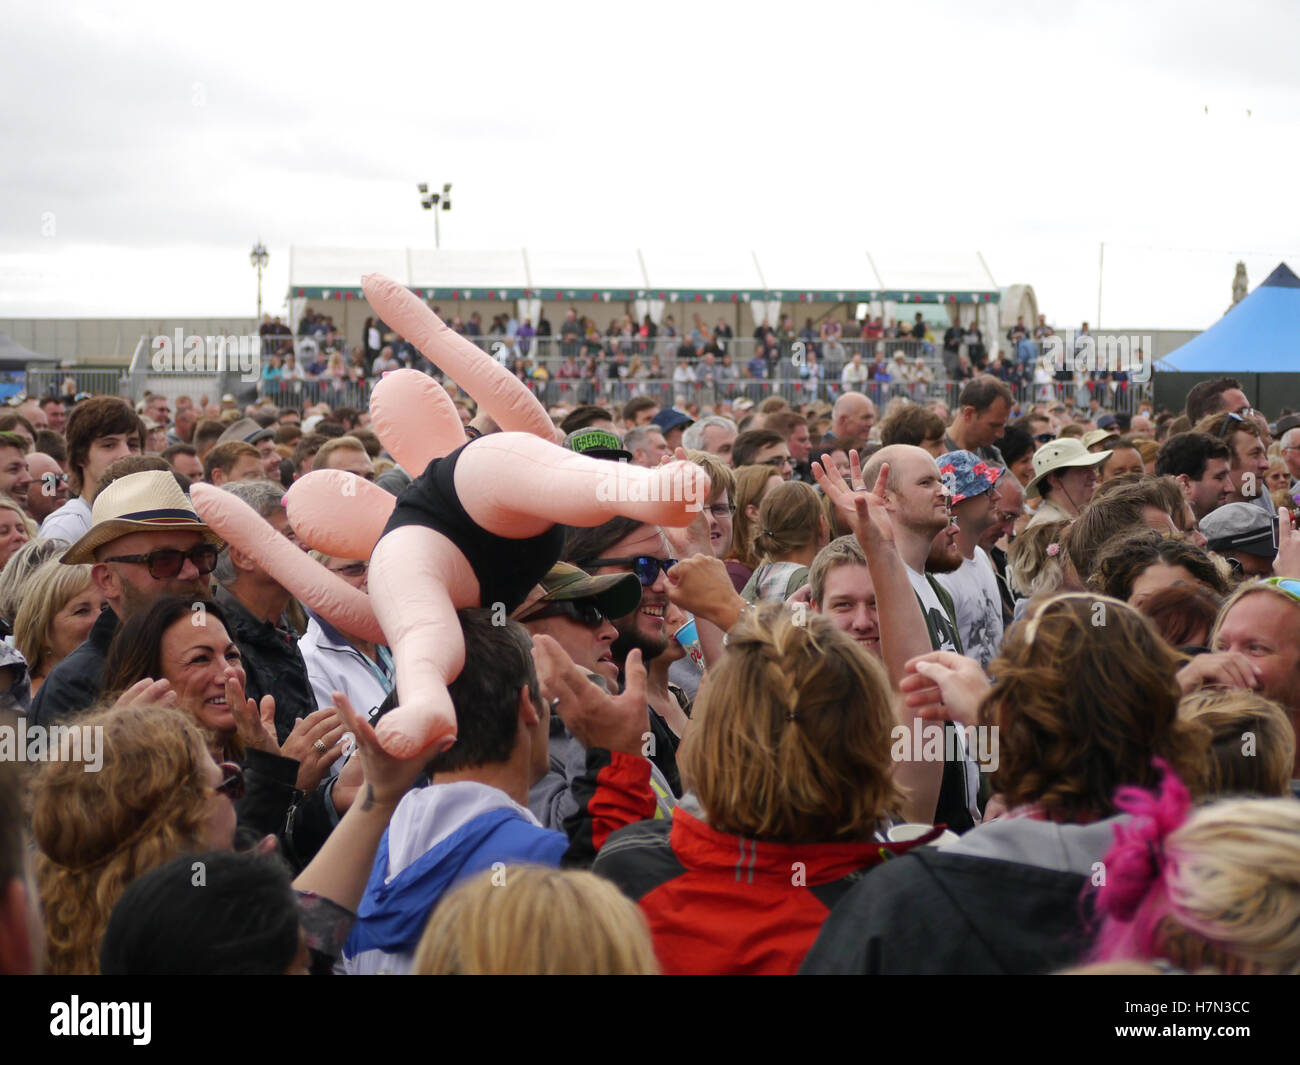 A blow up doll is sent crowd surfing at above a large music festival crowd Stock Photo